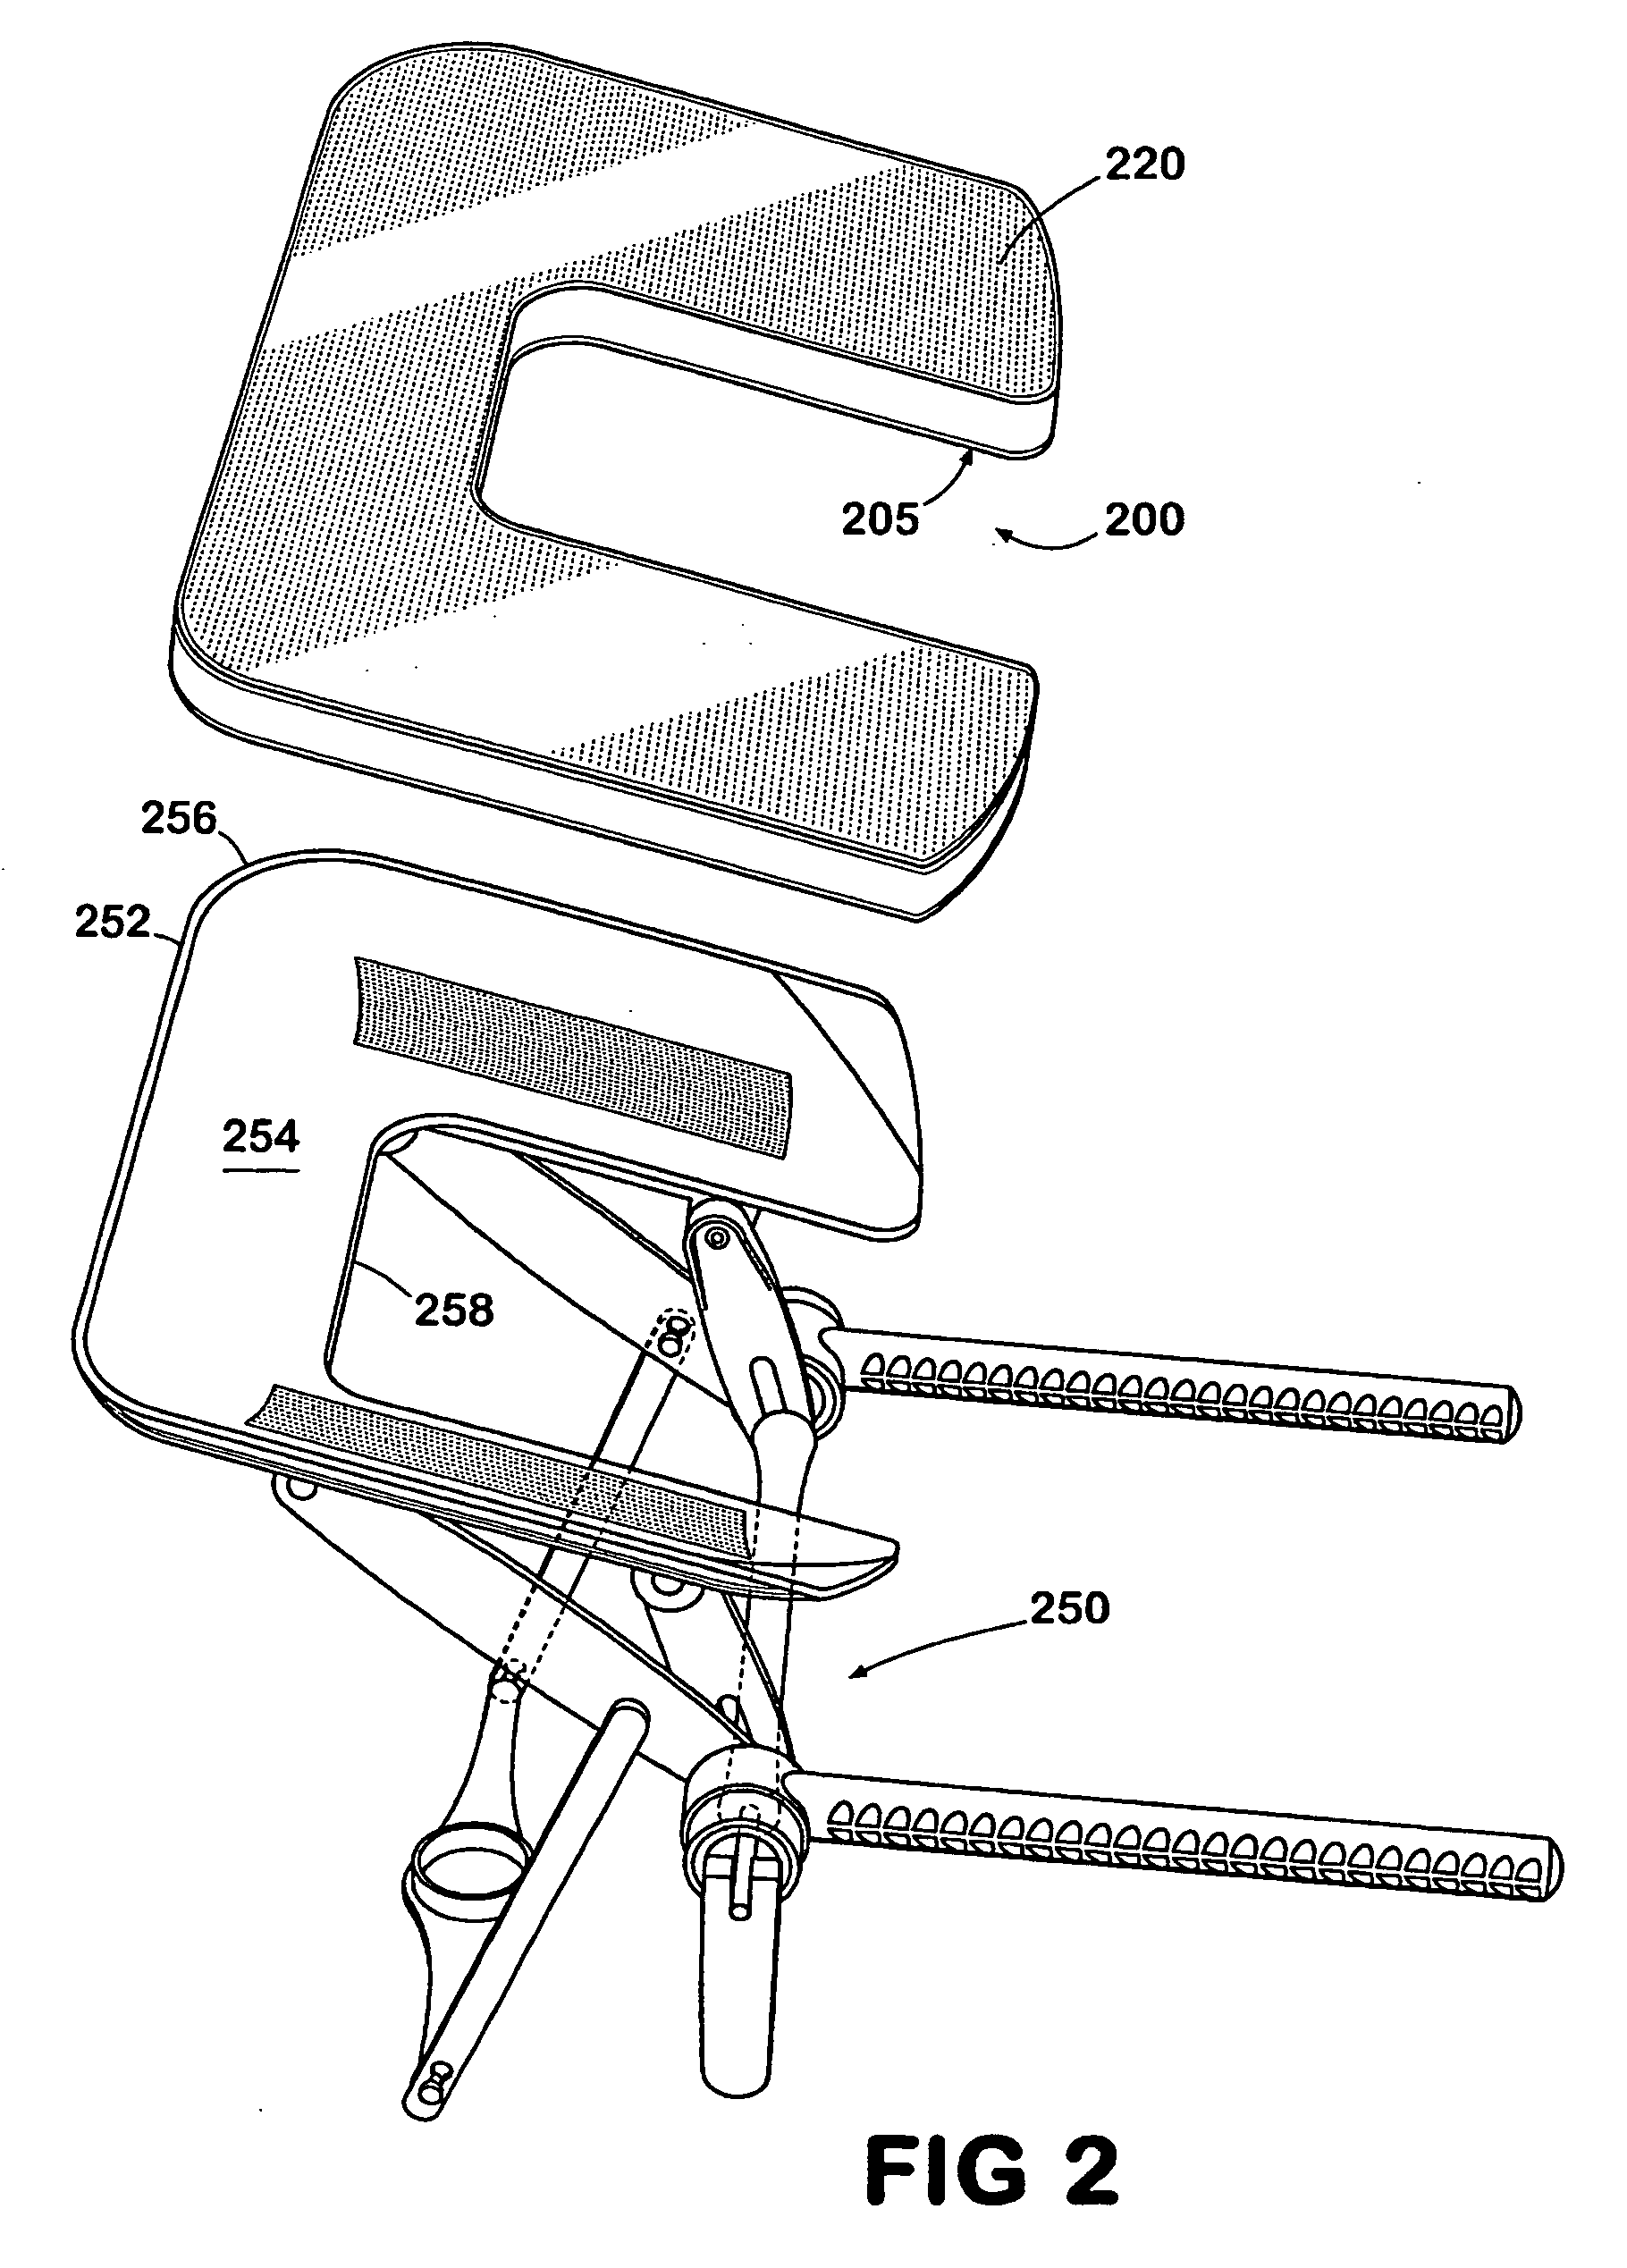 Adjustable head-support for therapy tables